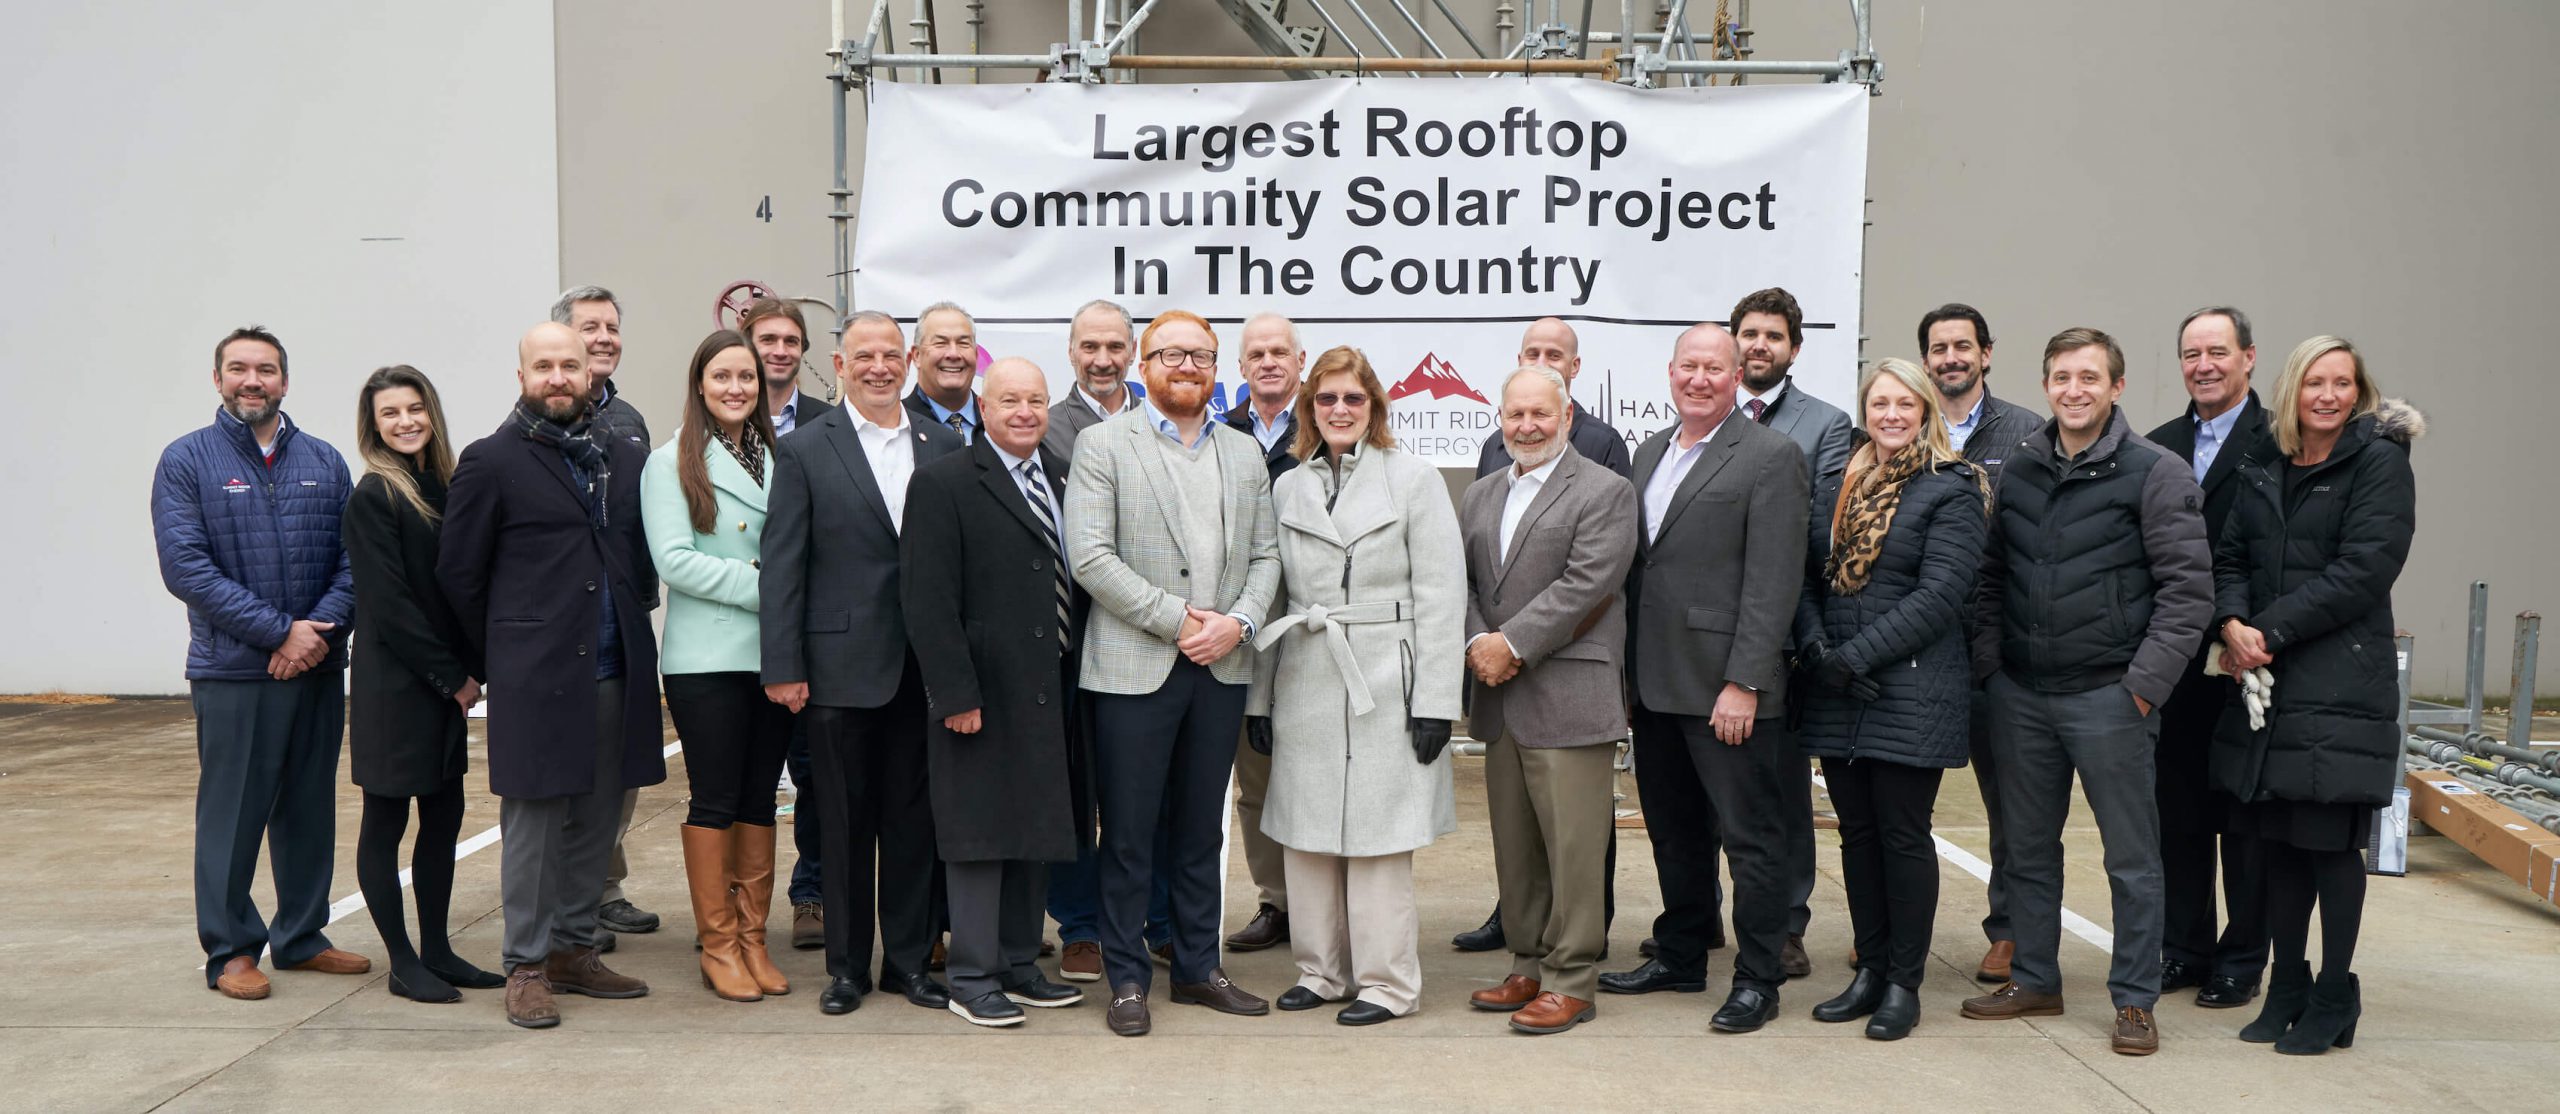 Summit Ridge Energy to develop 2.7 MW of rooftop solar in Maryland